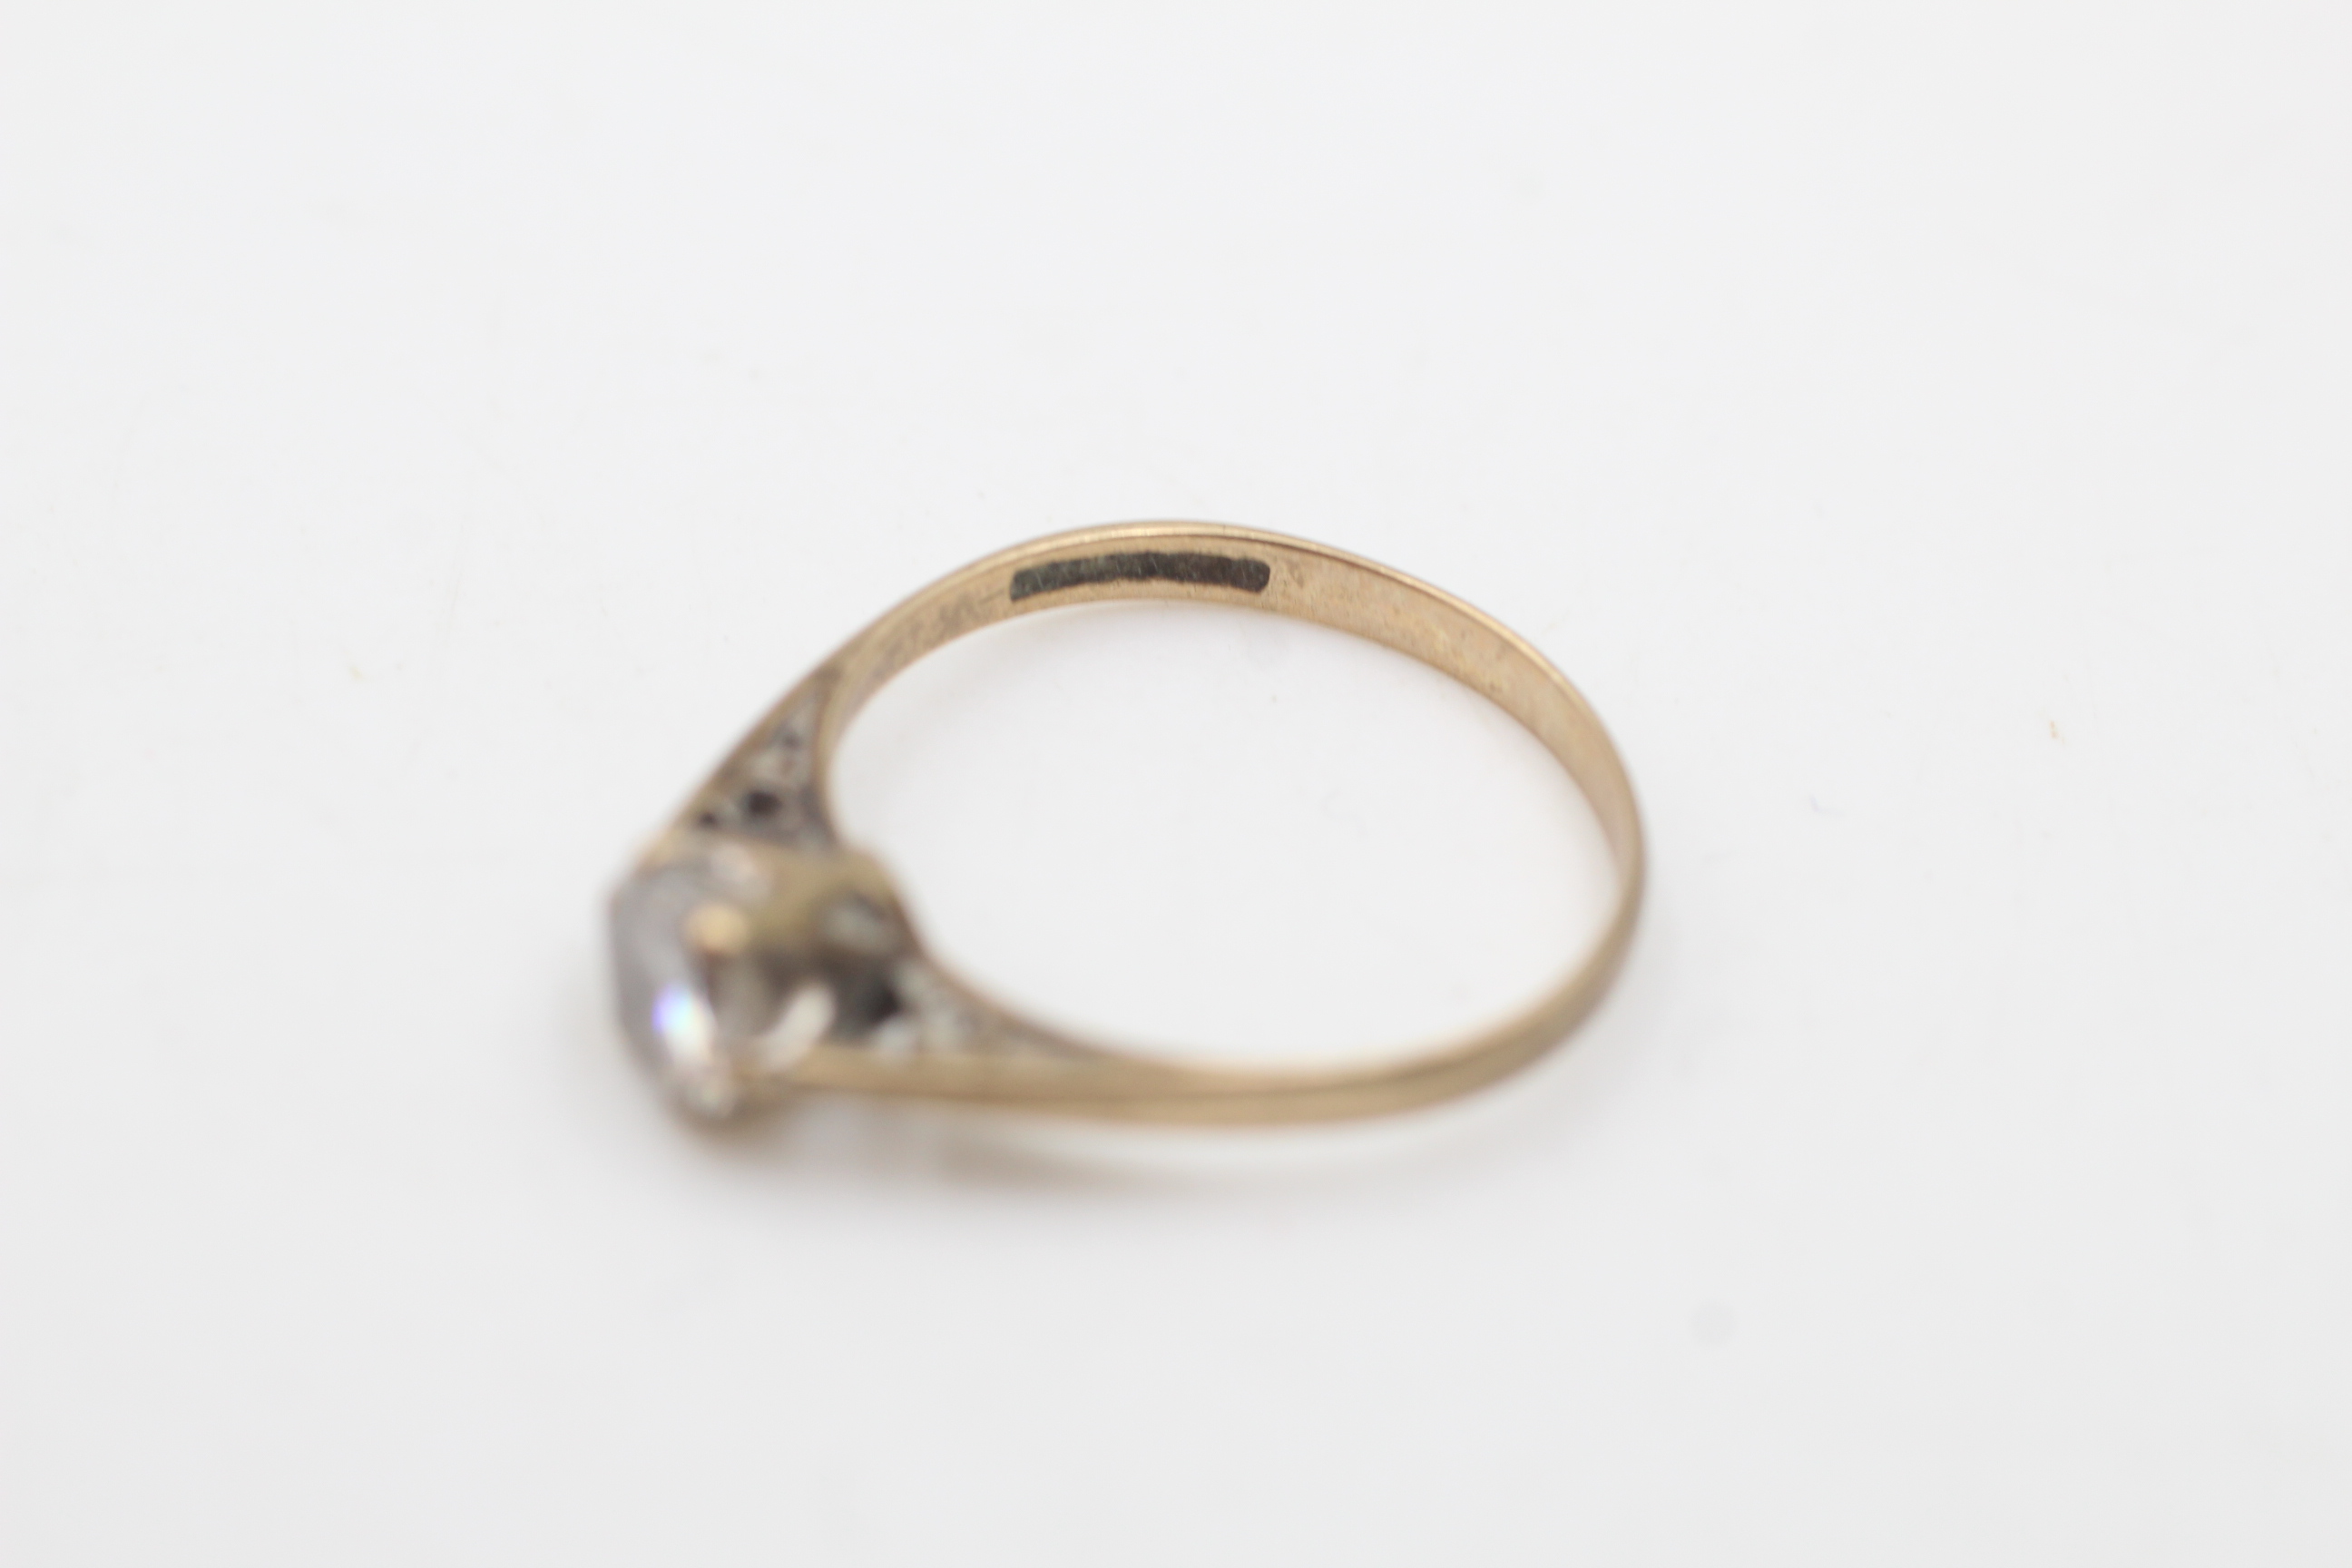 9ct gold clear gemstone solitaire ring (1.3g) - Image 3 of 5